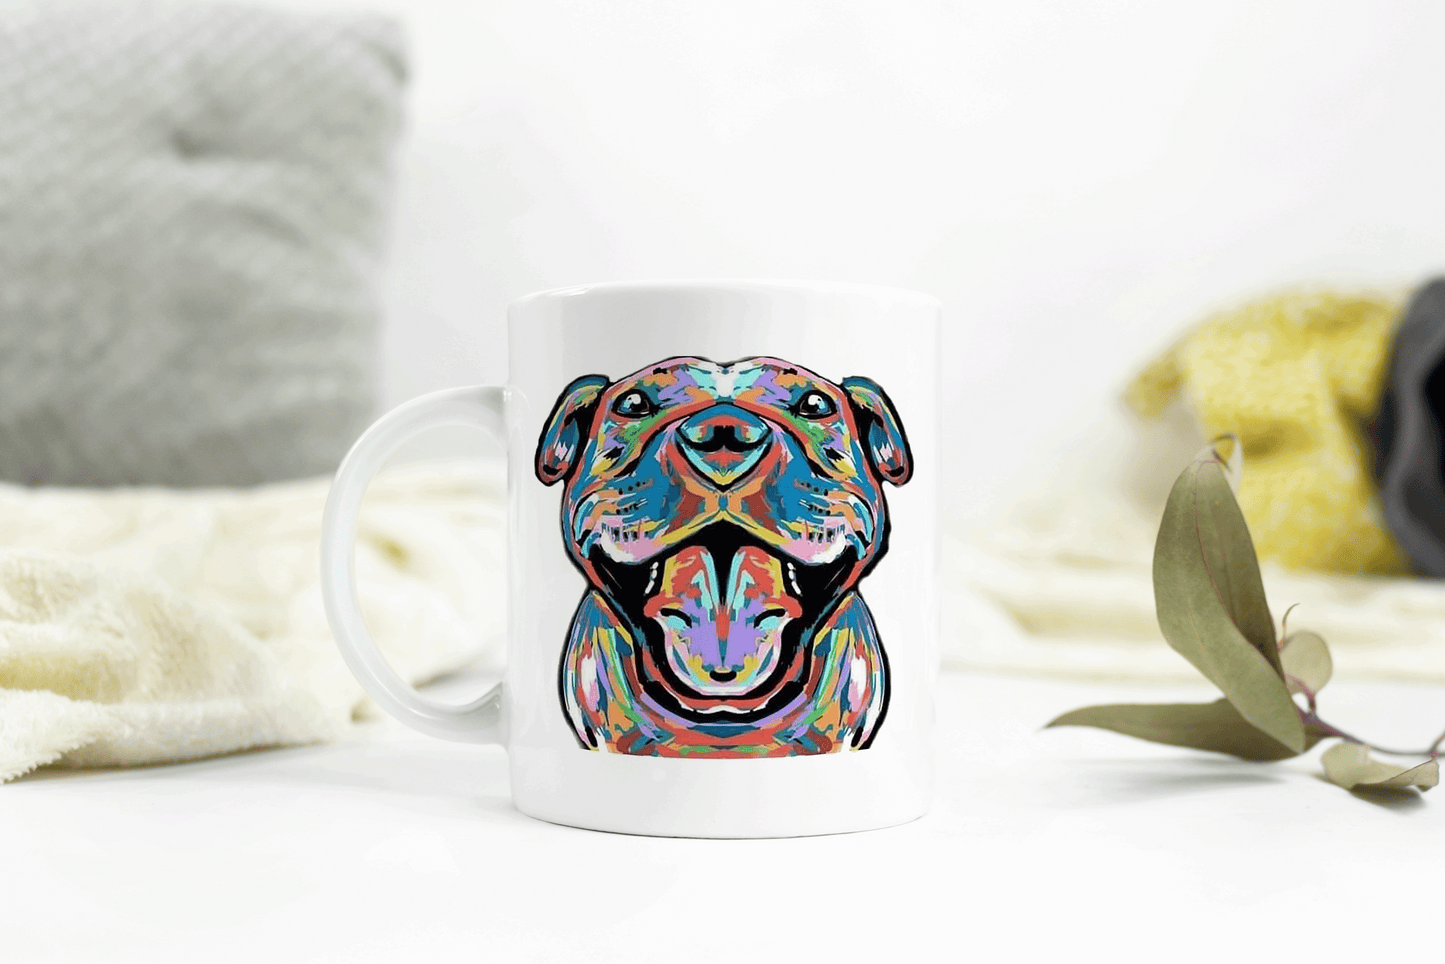  Colourful Smiling Staffie Coffee Mug by Free Spirit Accessories sold by Free Spirit Accessories